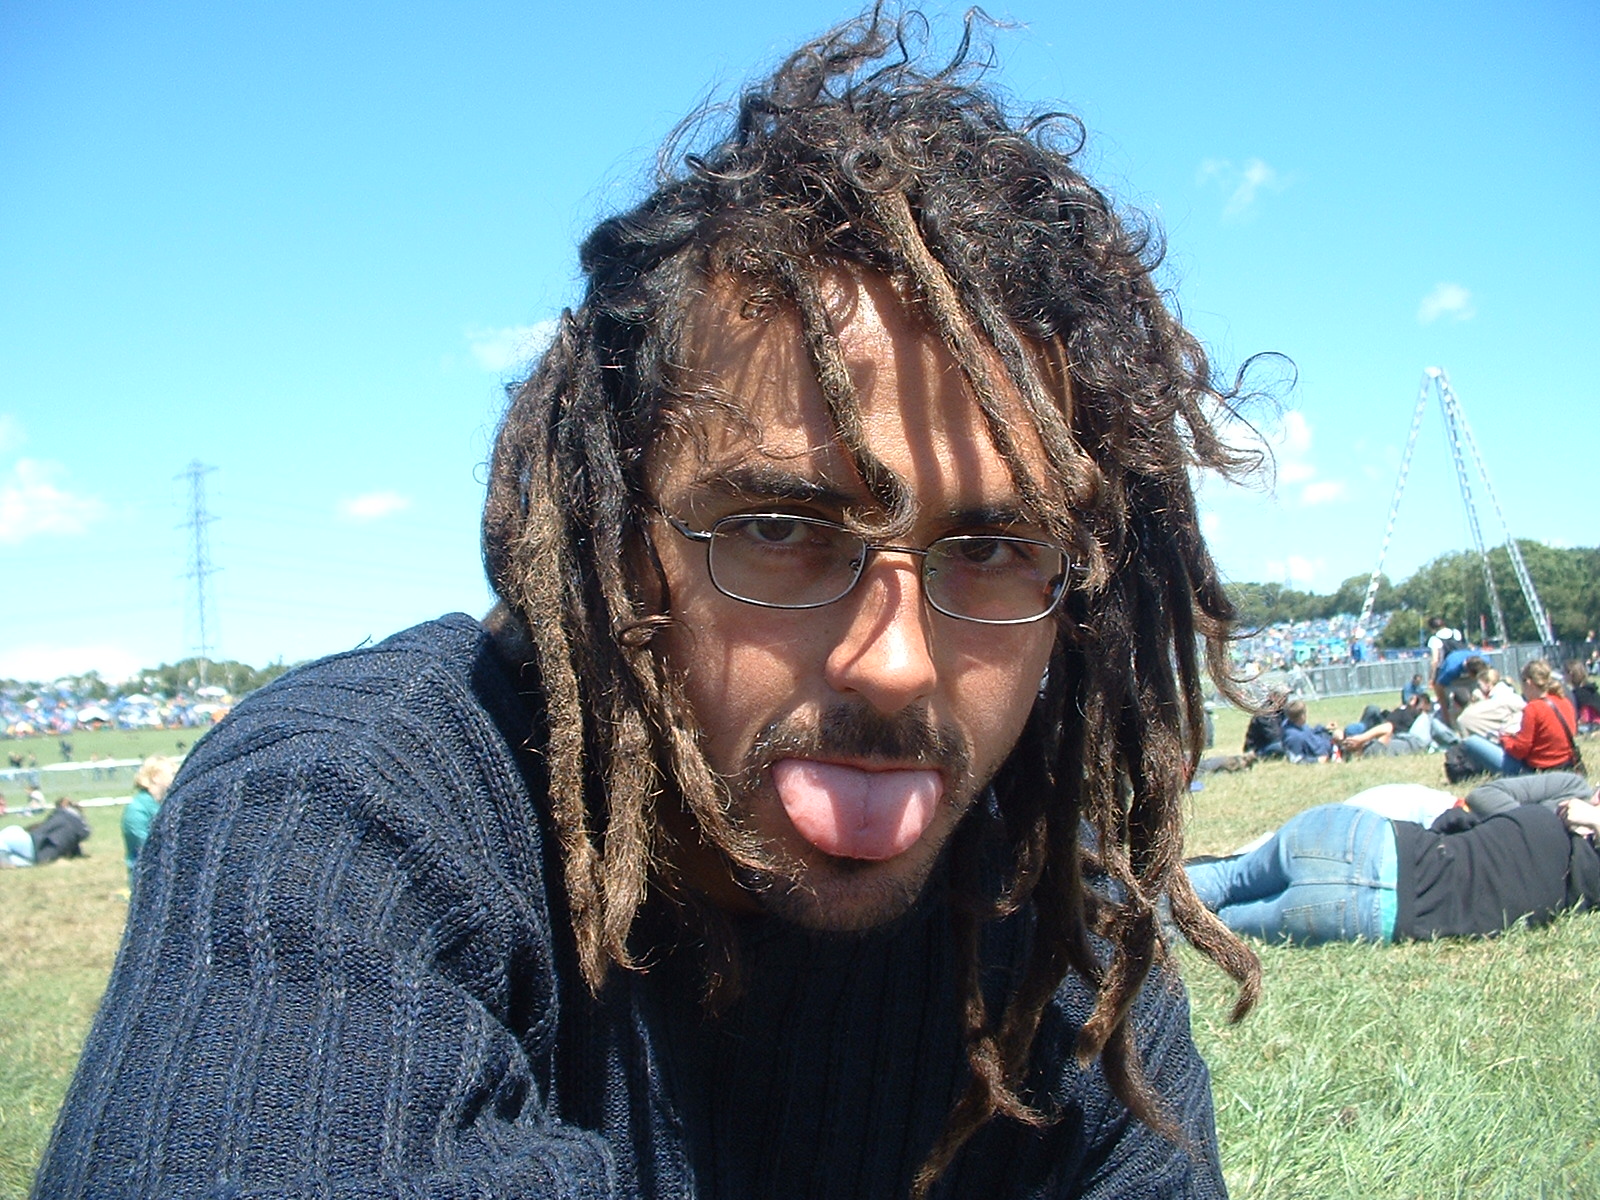 man in glasses sticking out his tongue while in the park